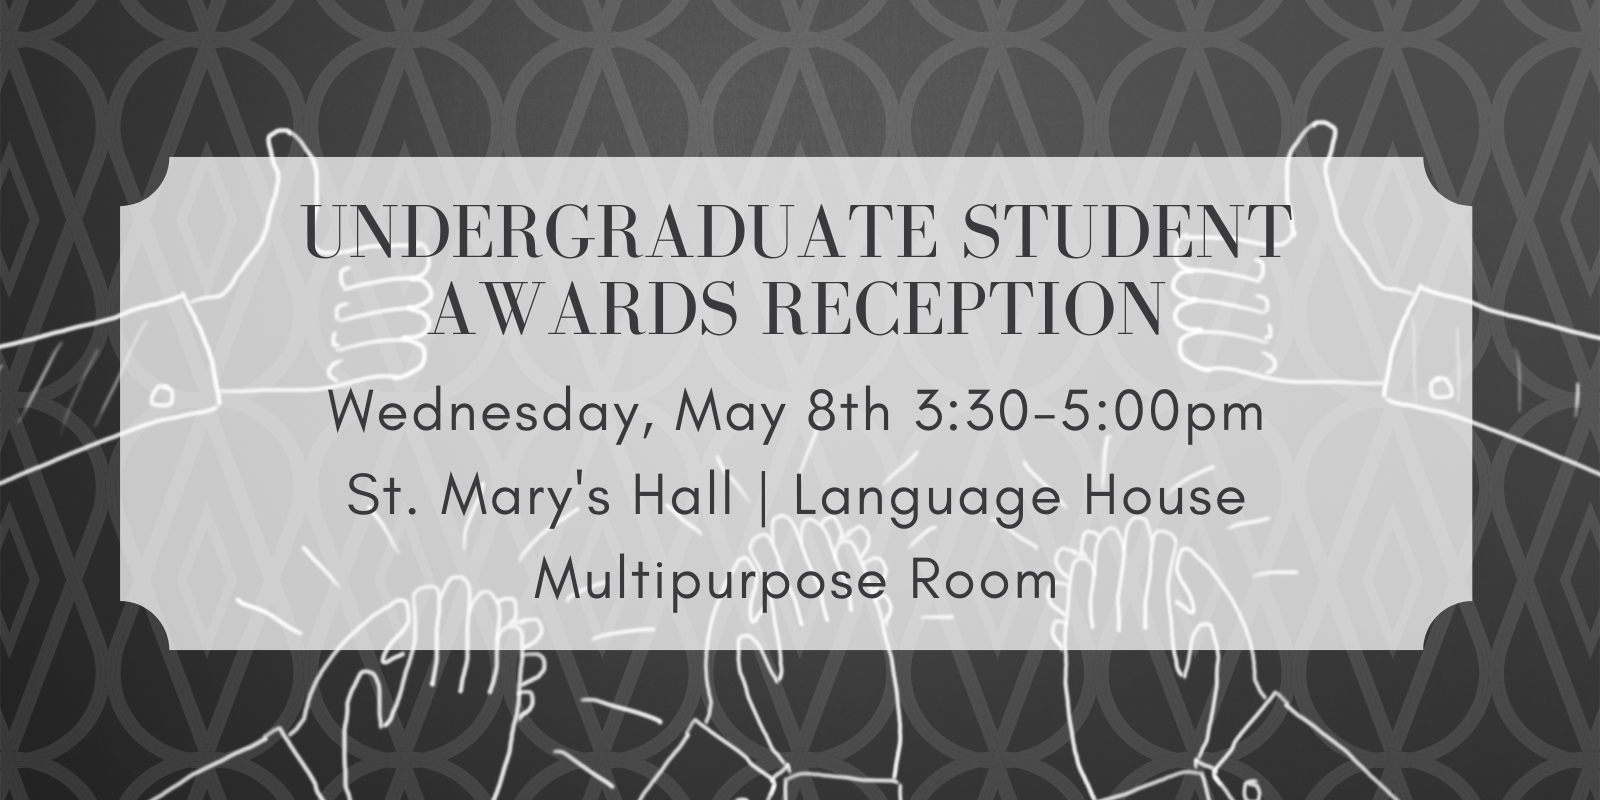 undergraduate awards reception inset image for Wednesday May 8th at 3:30pm